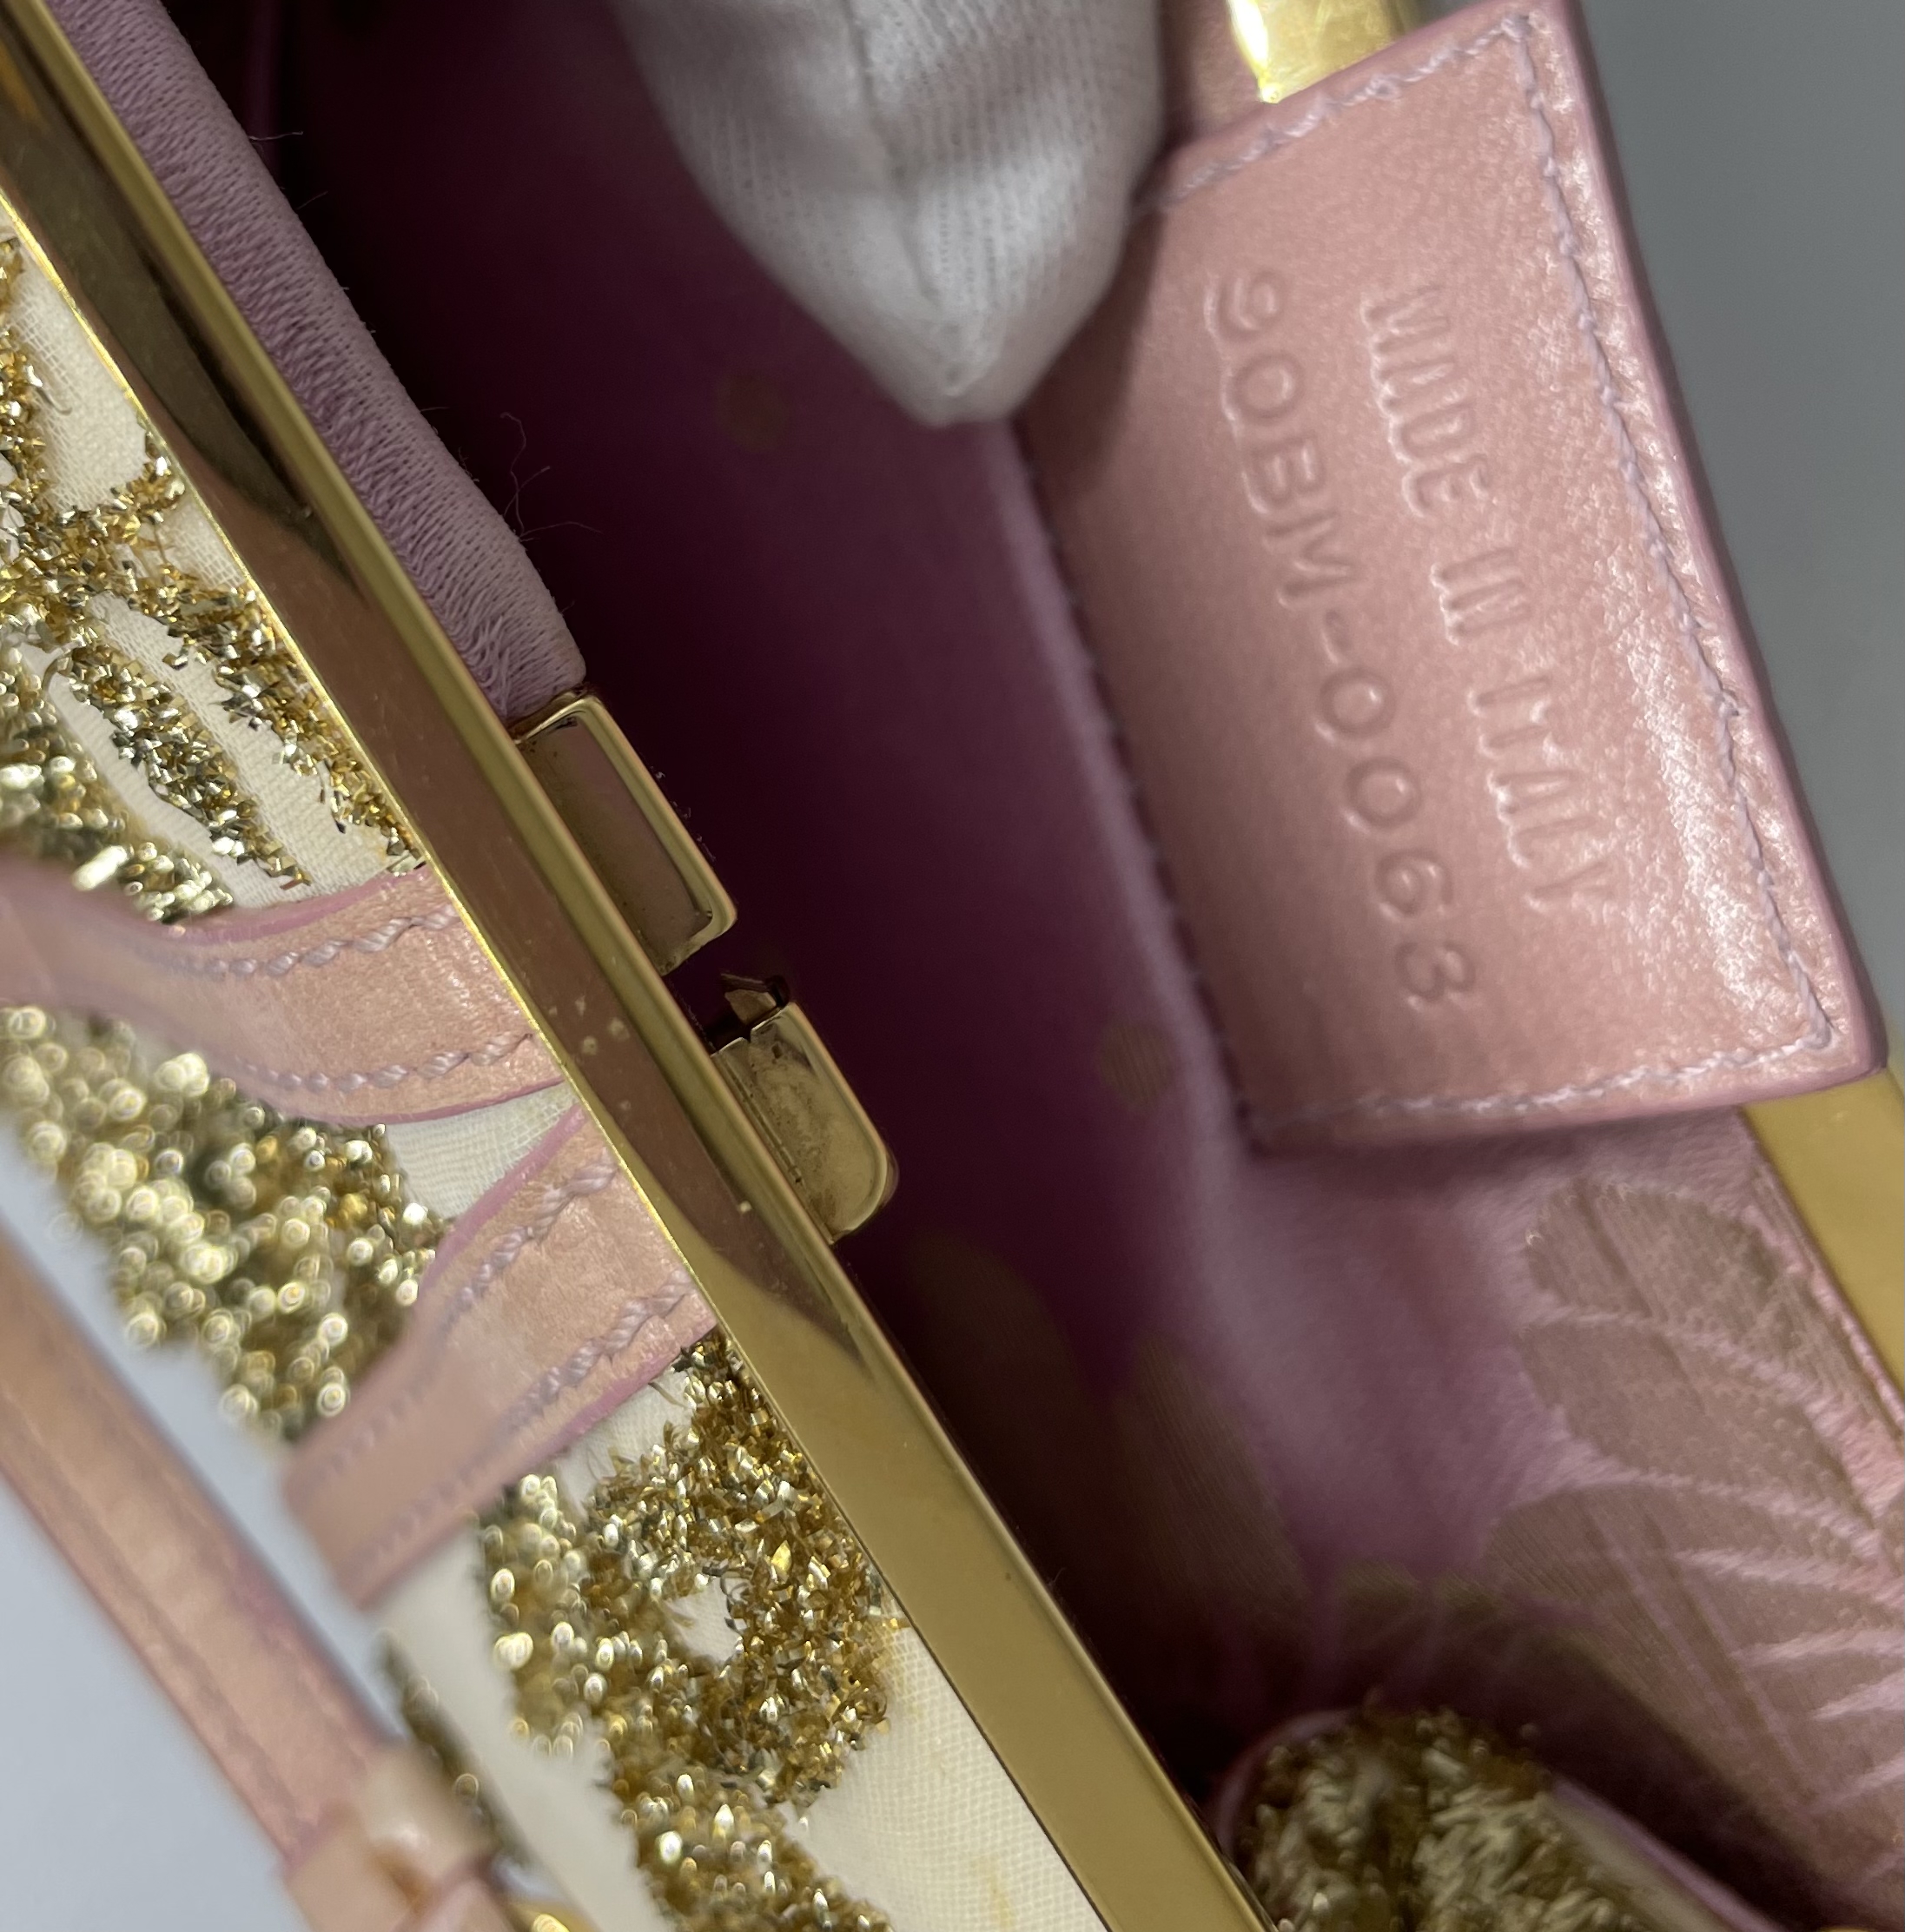 Dior Saddle MiniClutch Limited edition in gold coloured embroidery over cream satin - Image 4 of 14